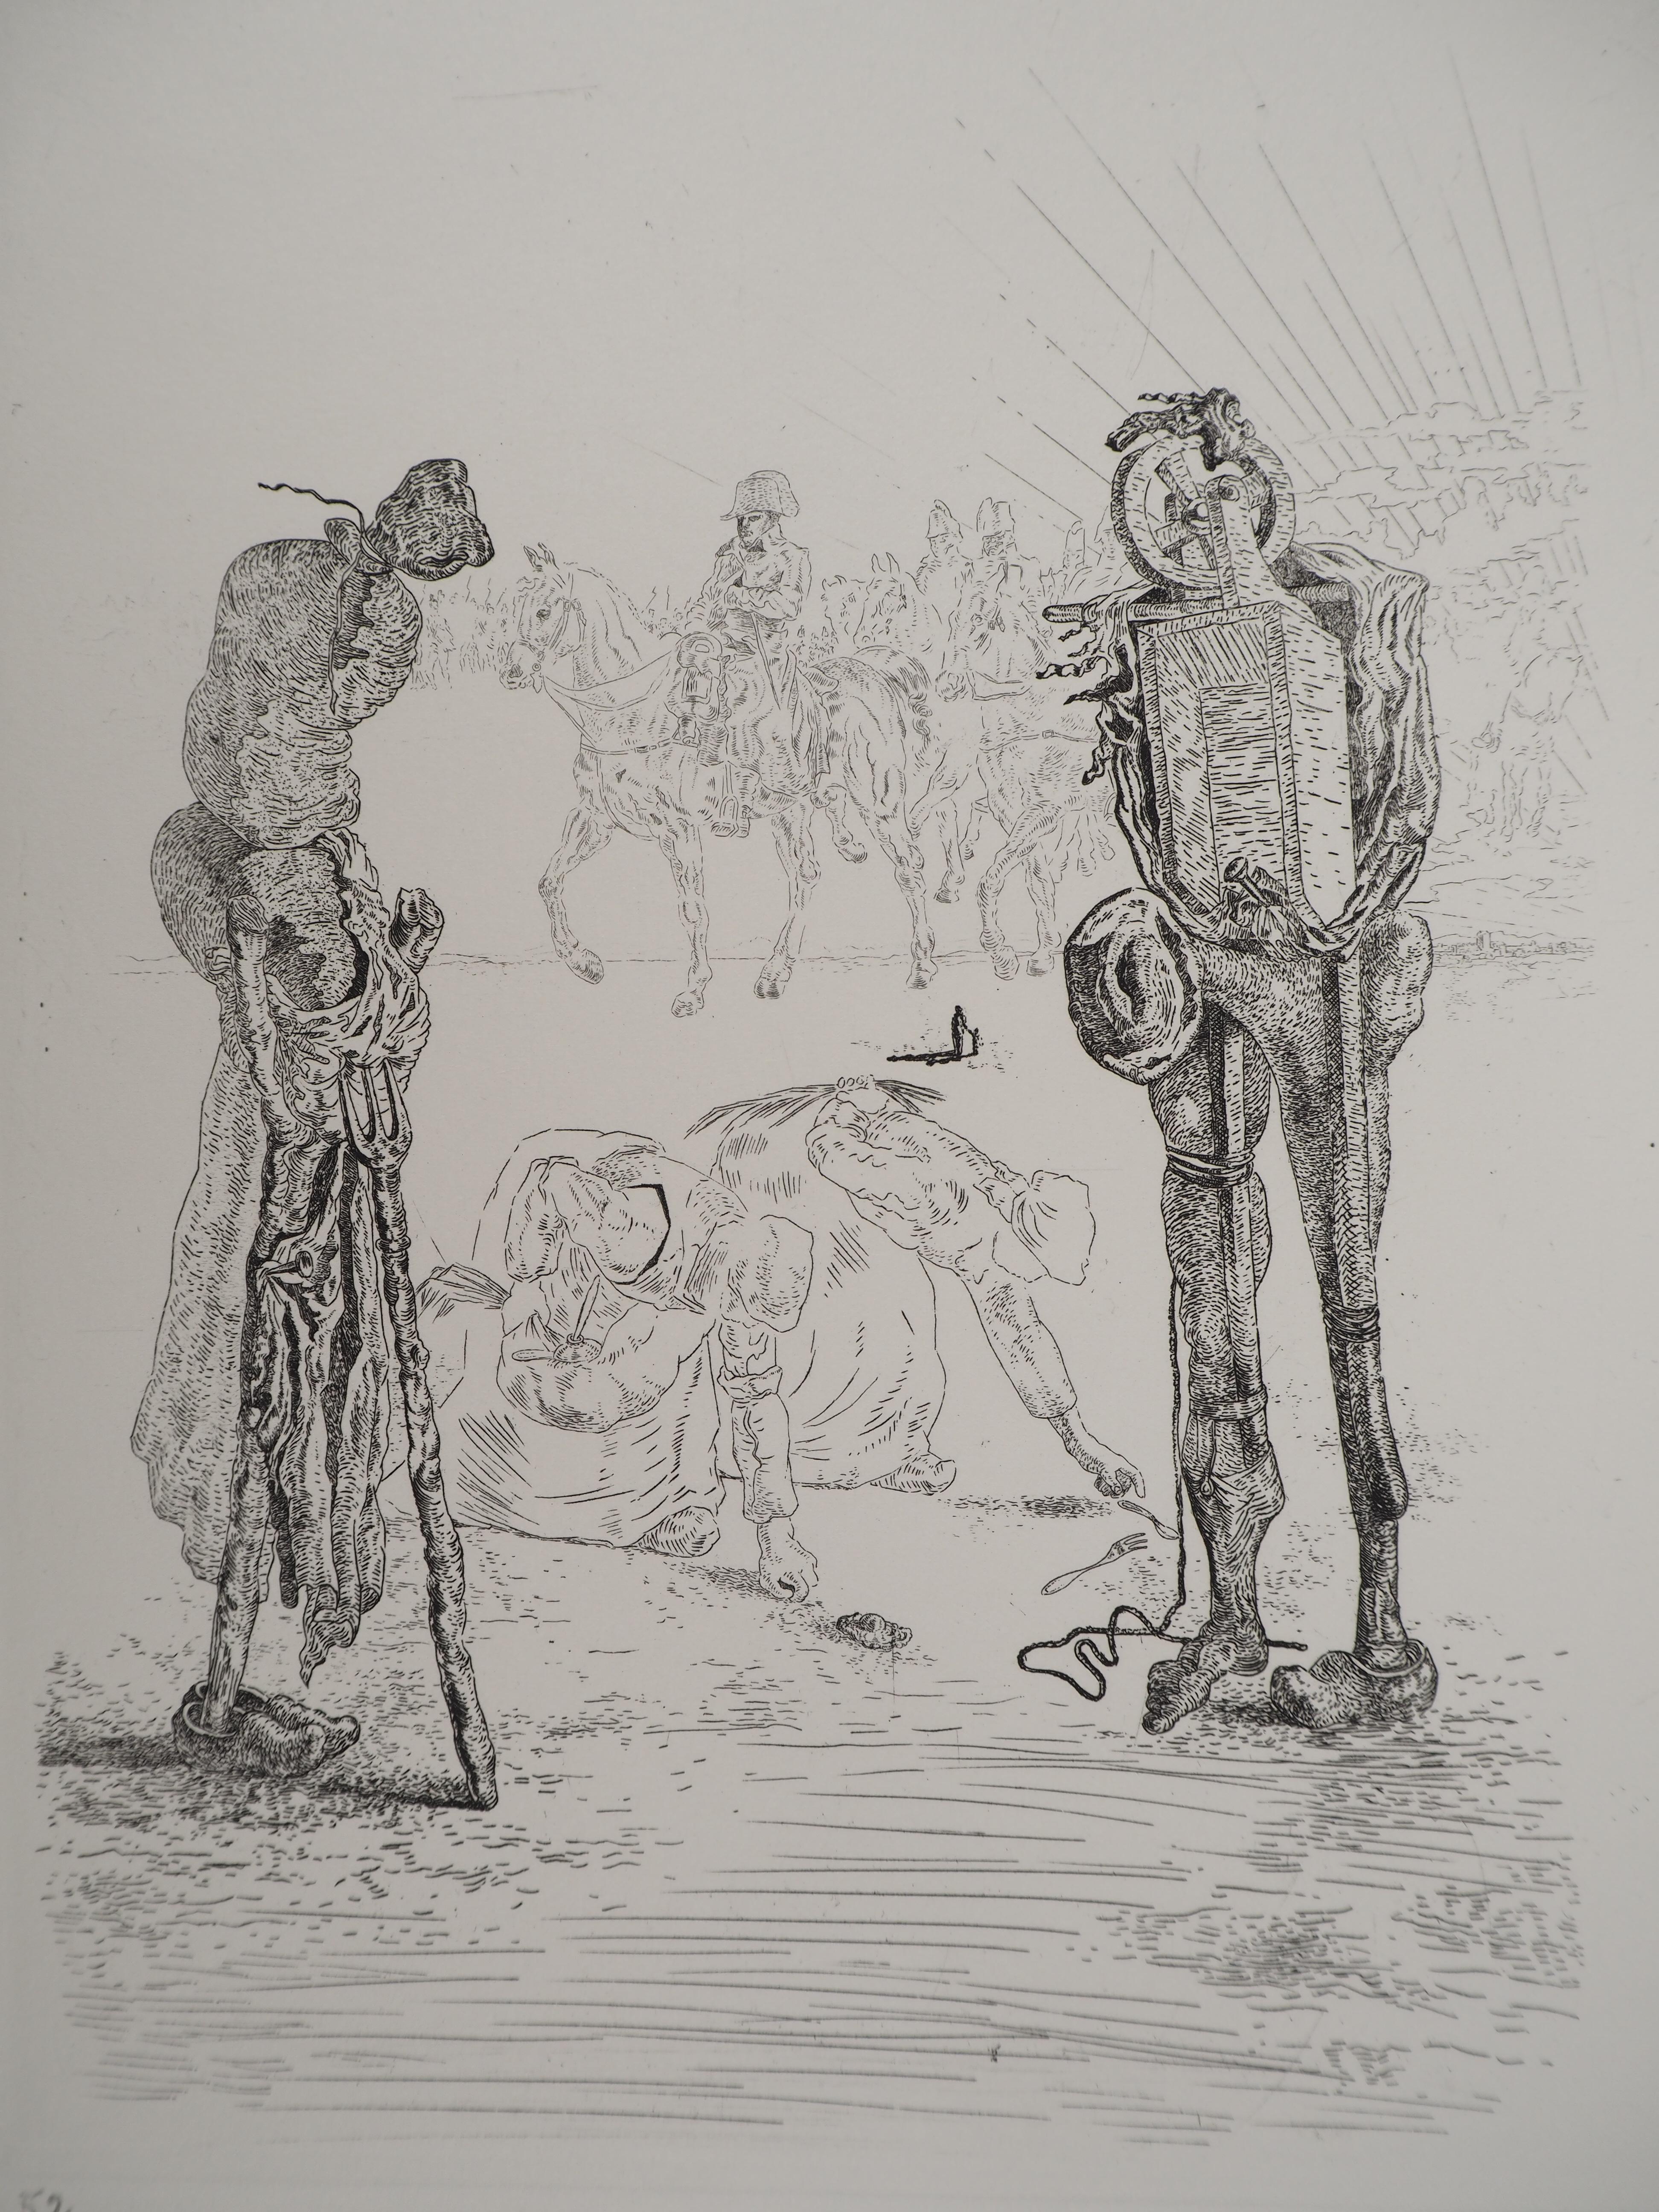 Salvador Dali
Napoleonic troops passing through, 1975

Original etching 
Signed in pencil 
Limited to 100 copies (Here numbered 52)
On Arches vellum  32.5 x 25 cm (c. 12.7 x 9.8 in)

REFERENCES :
- Catalog raisonne Field #34-2
- Catalog raisonne